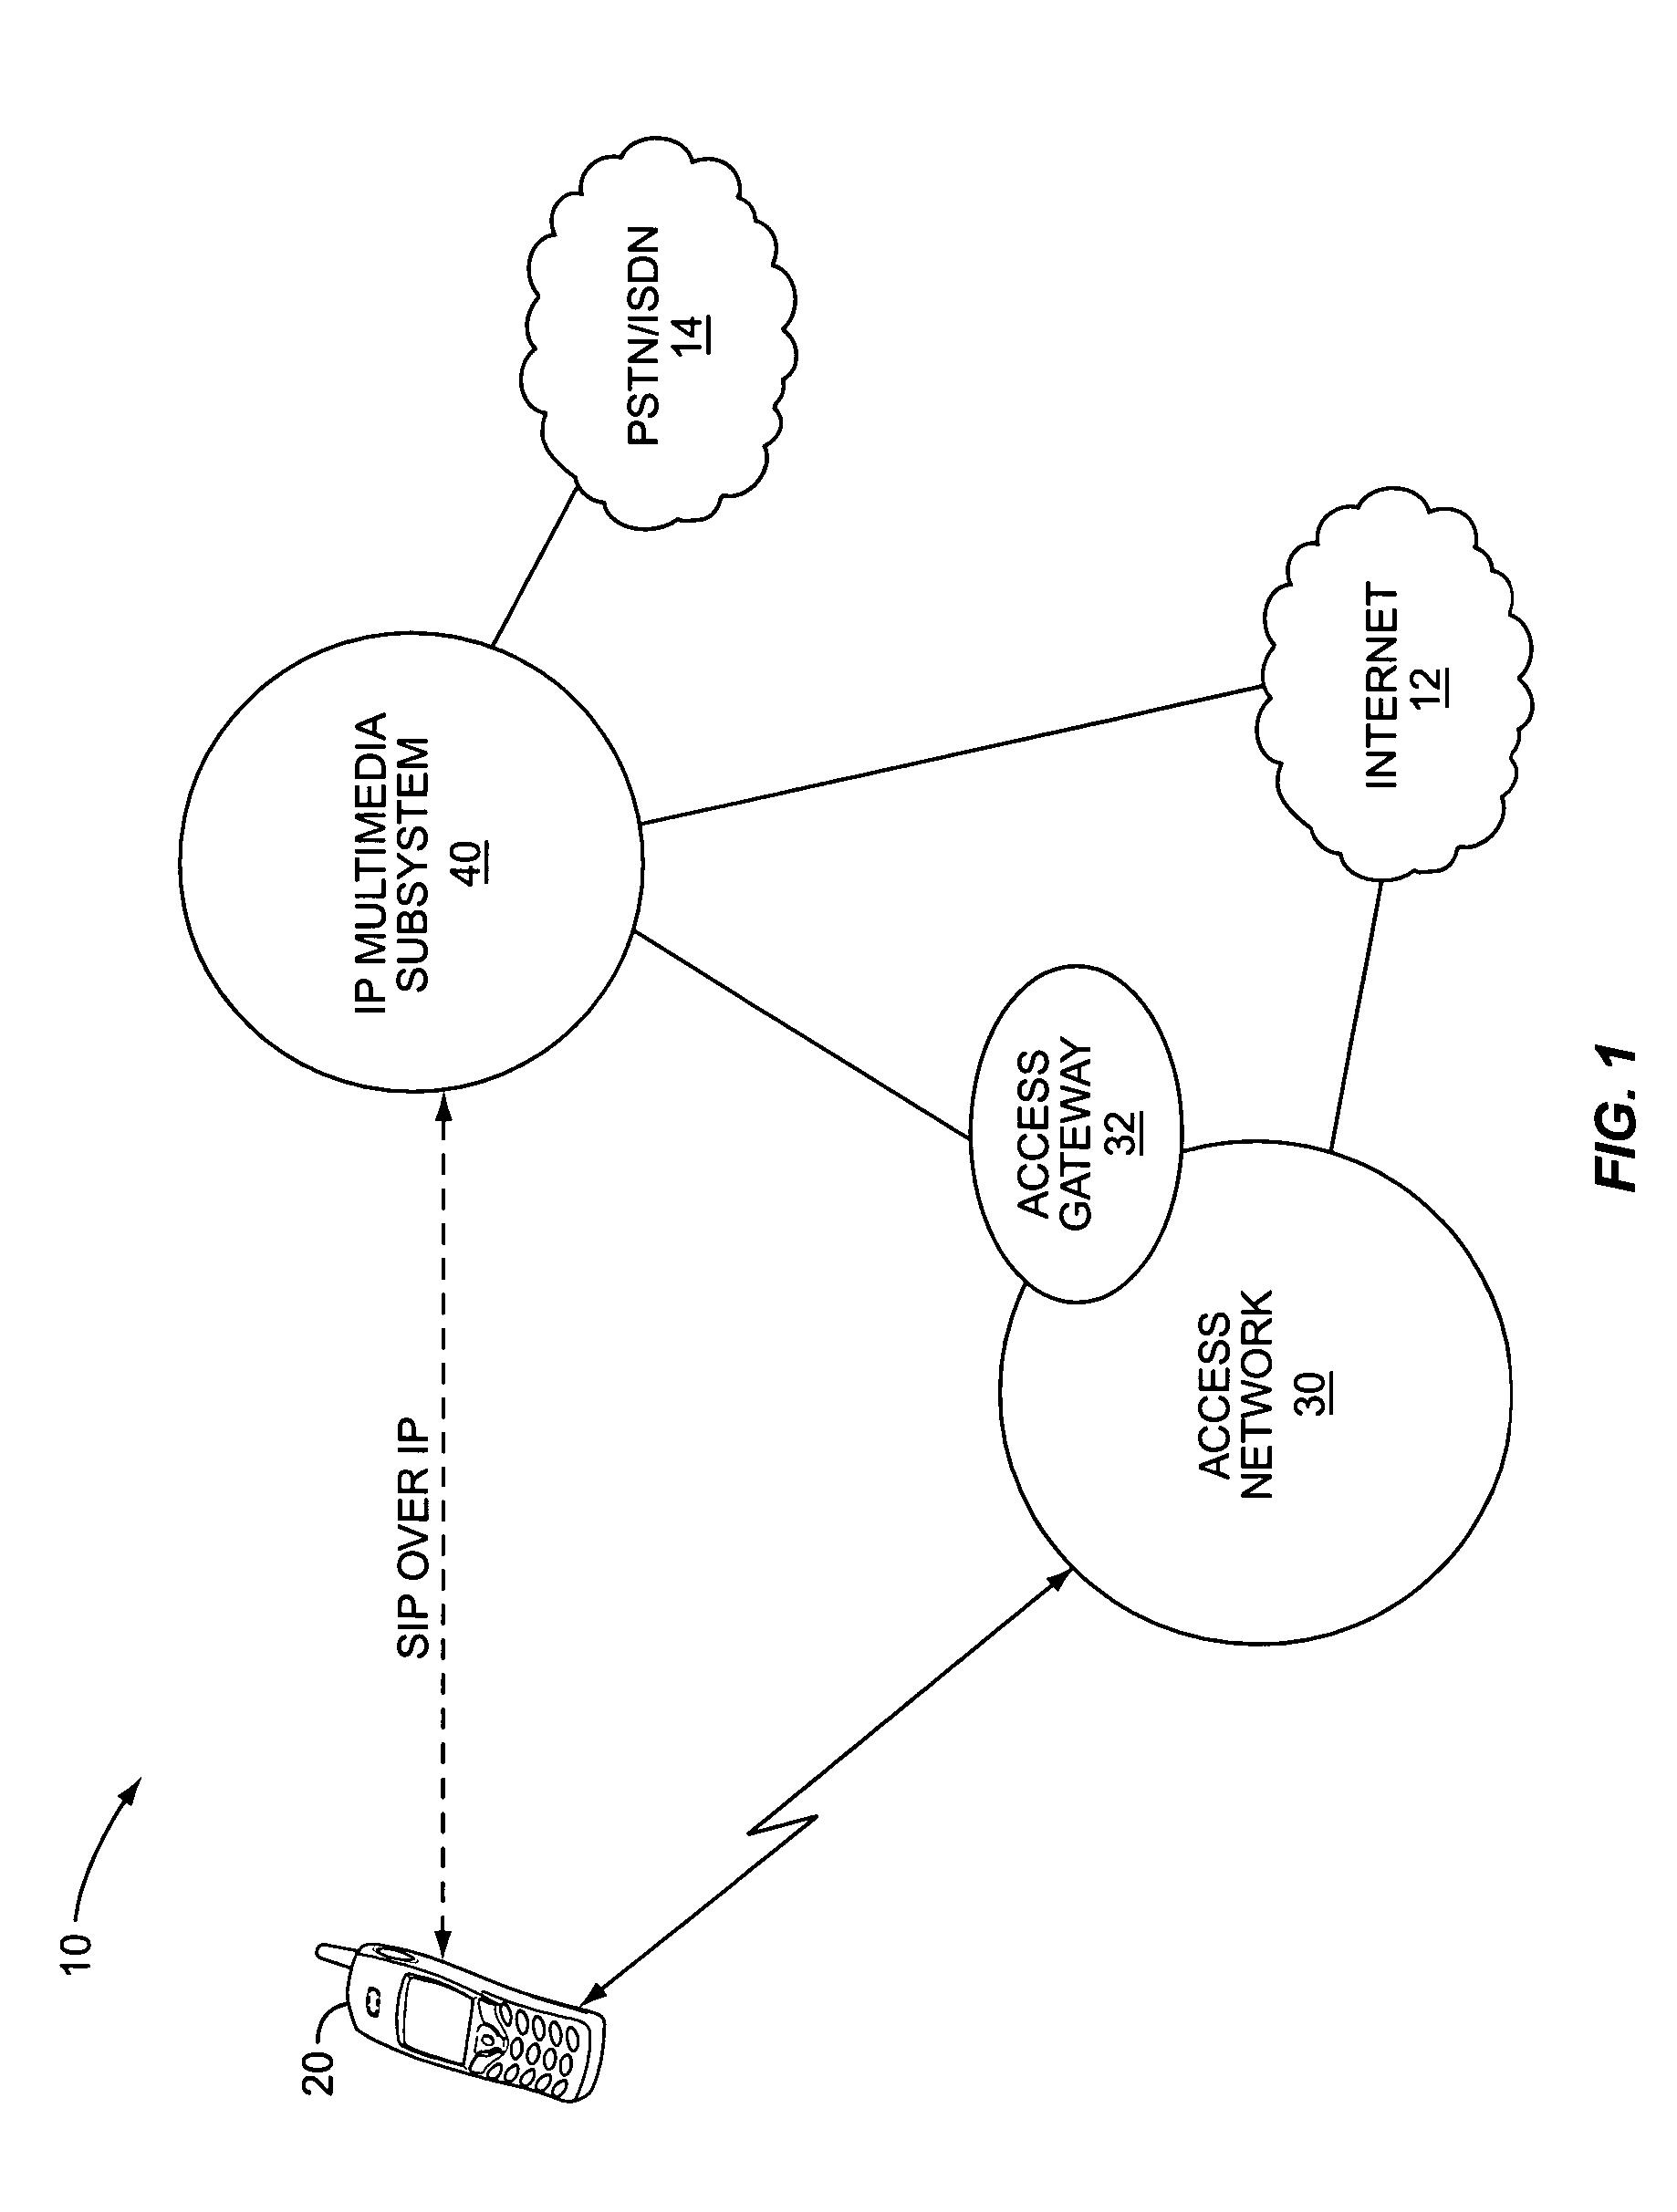 Method to facilitate distribution of group identifications for push-to-talk groups